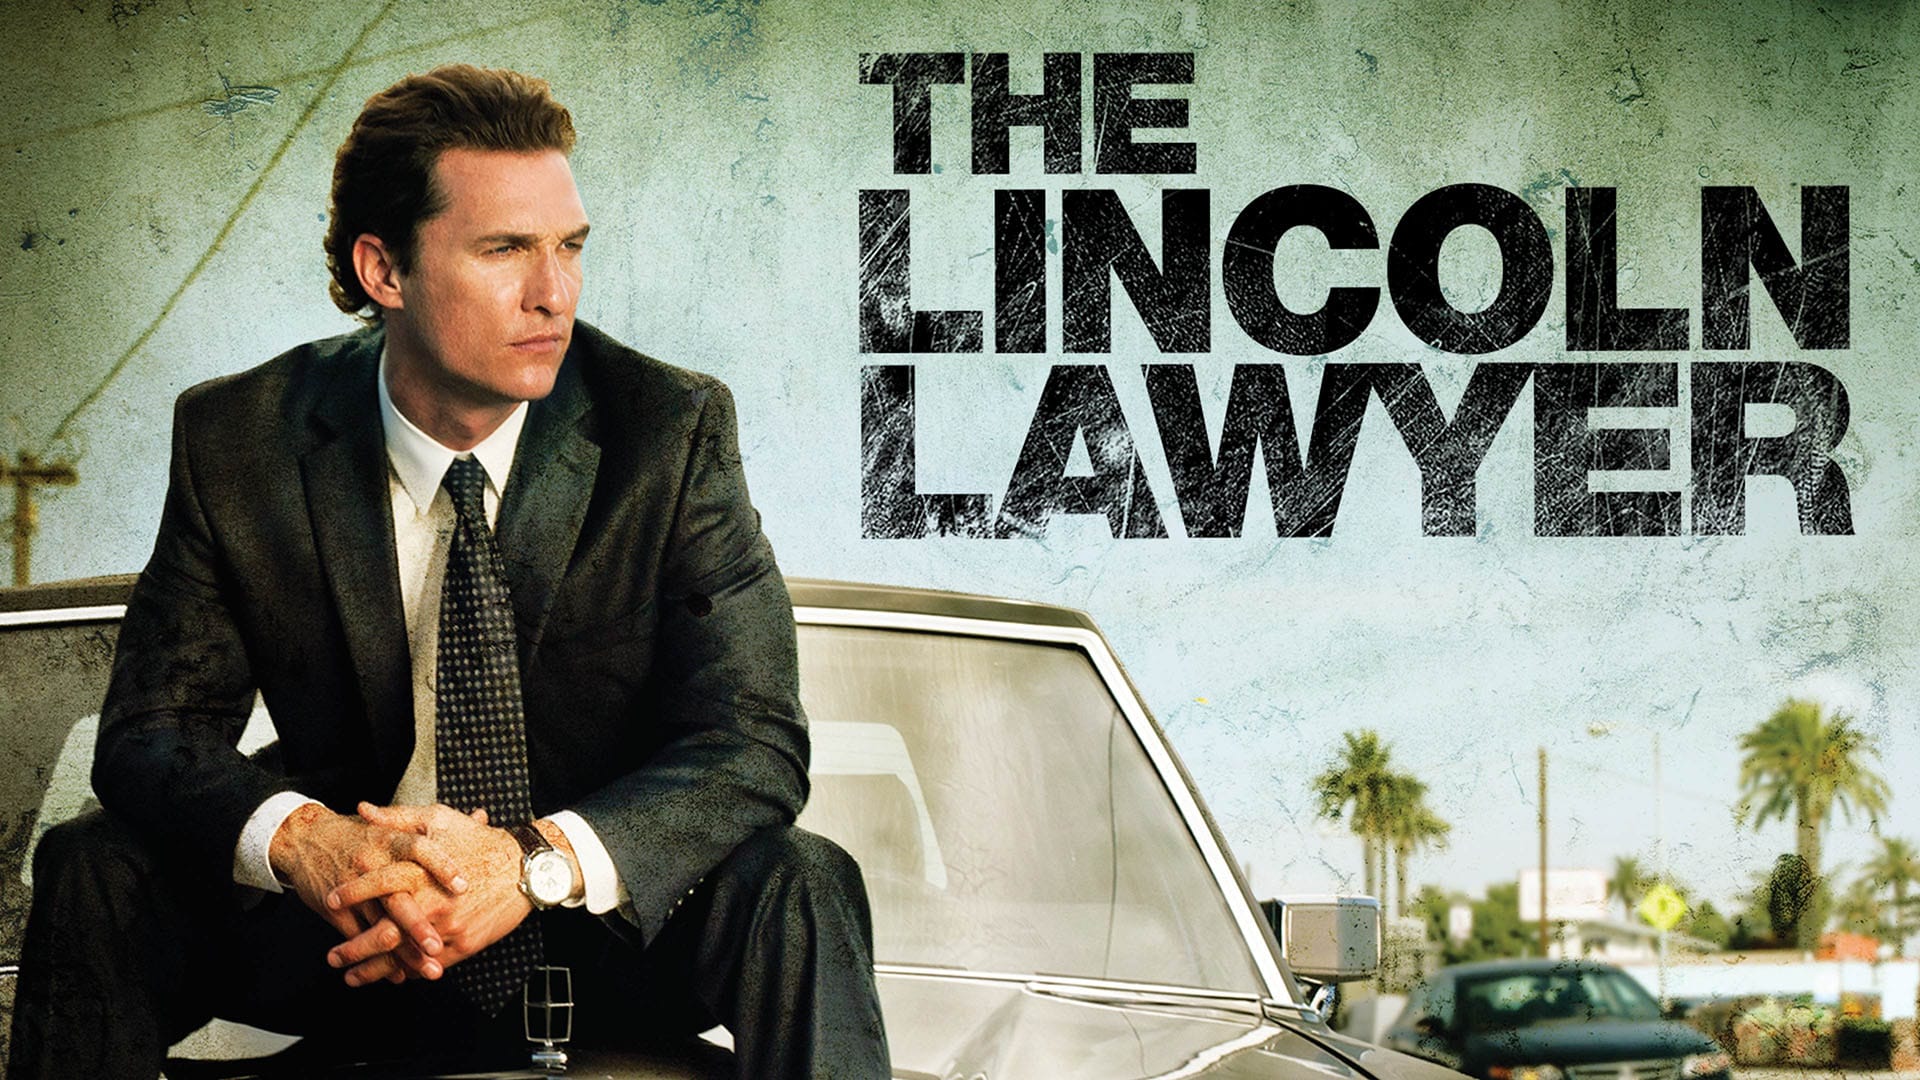 Watch The Lincoln Lawyer Online | Stream Full Movies